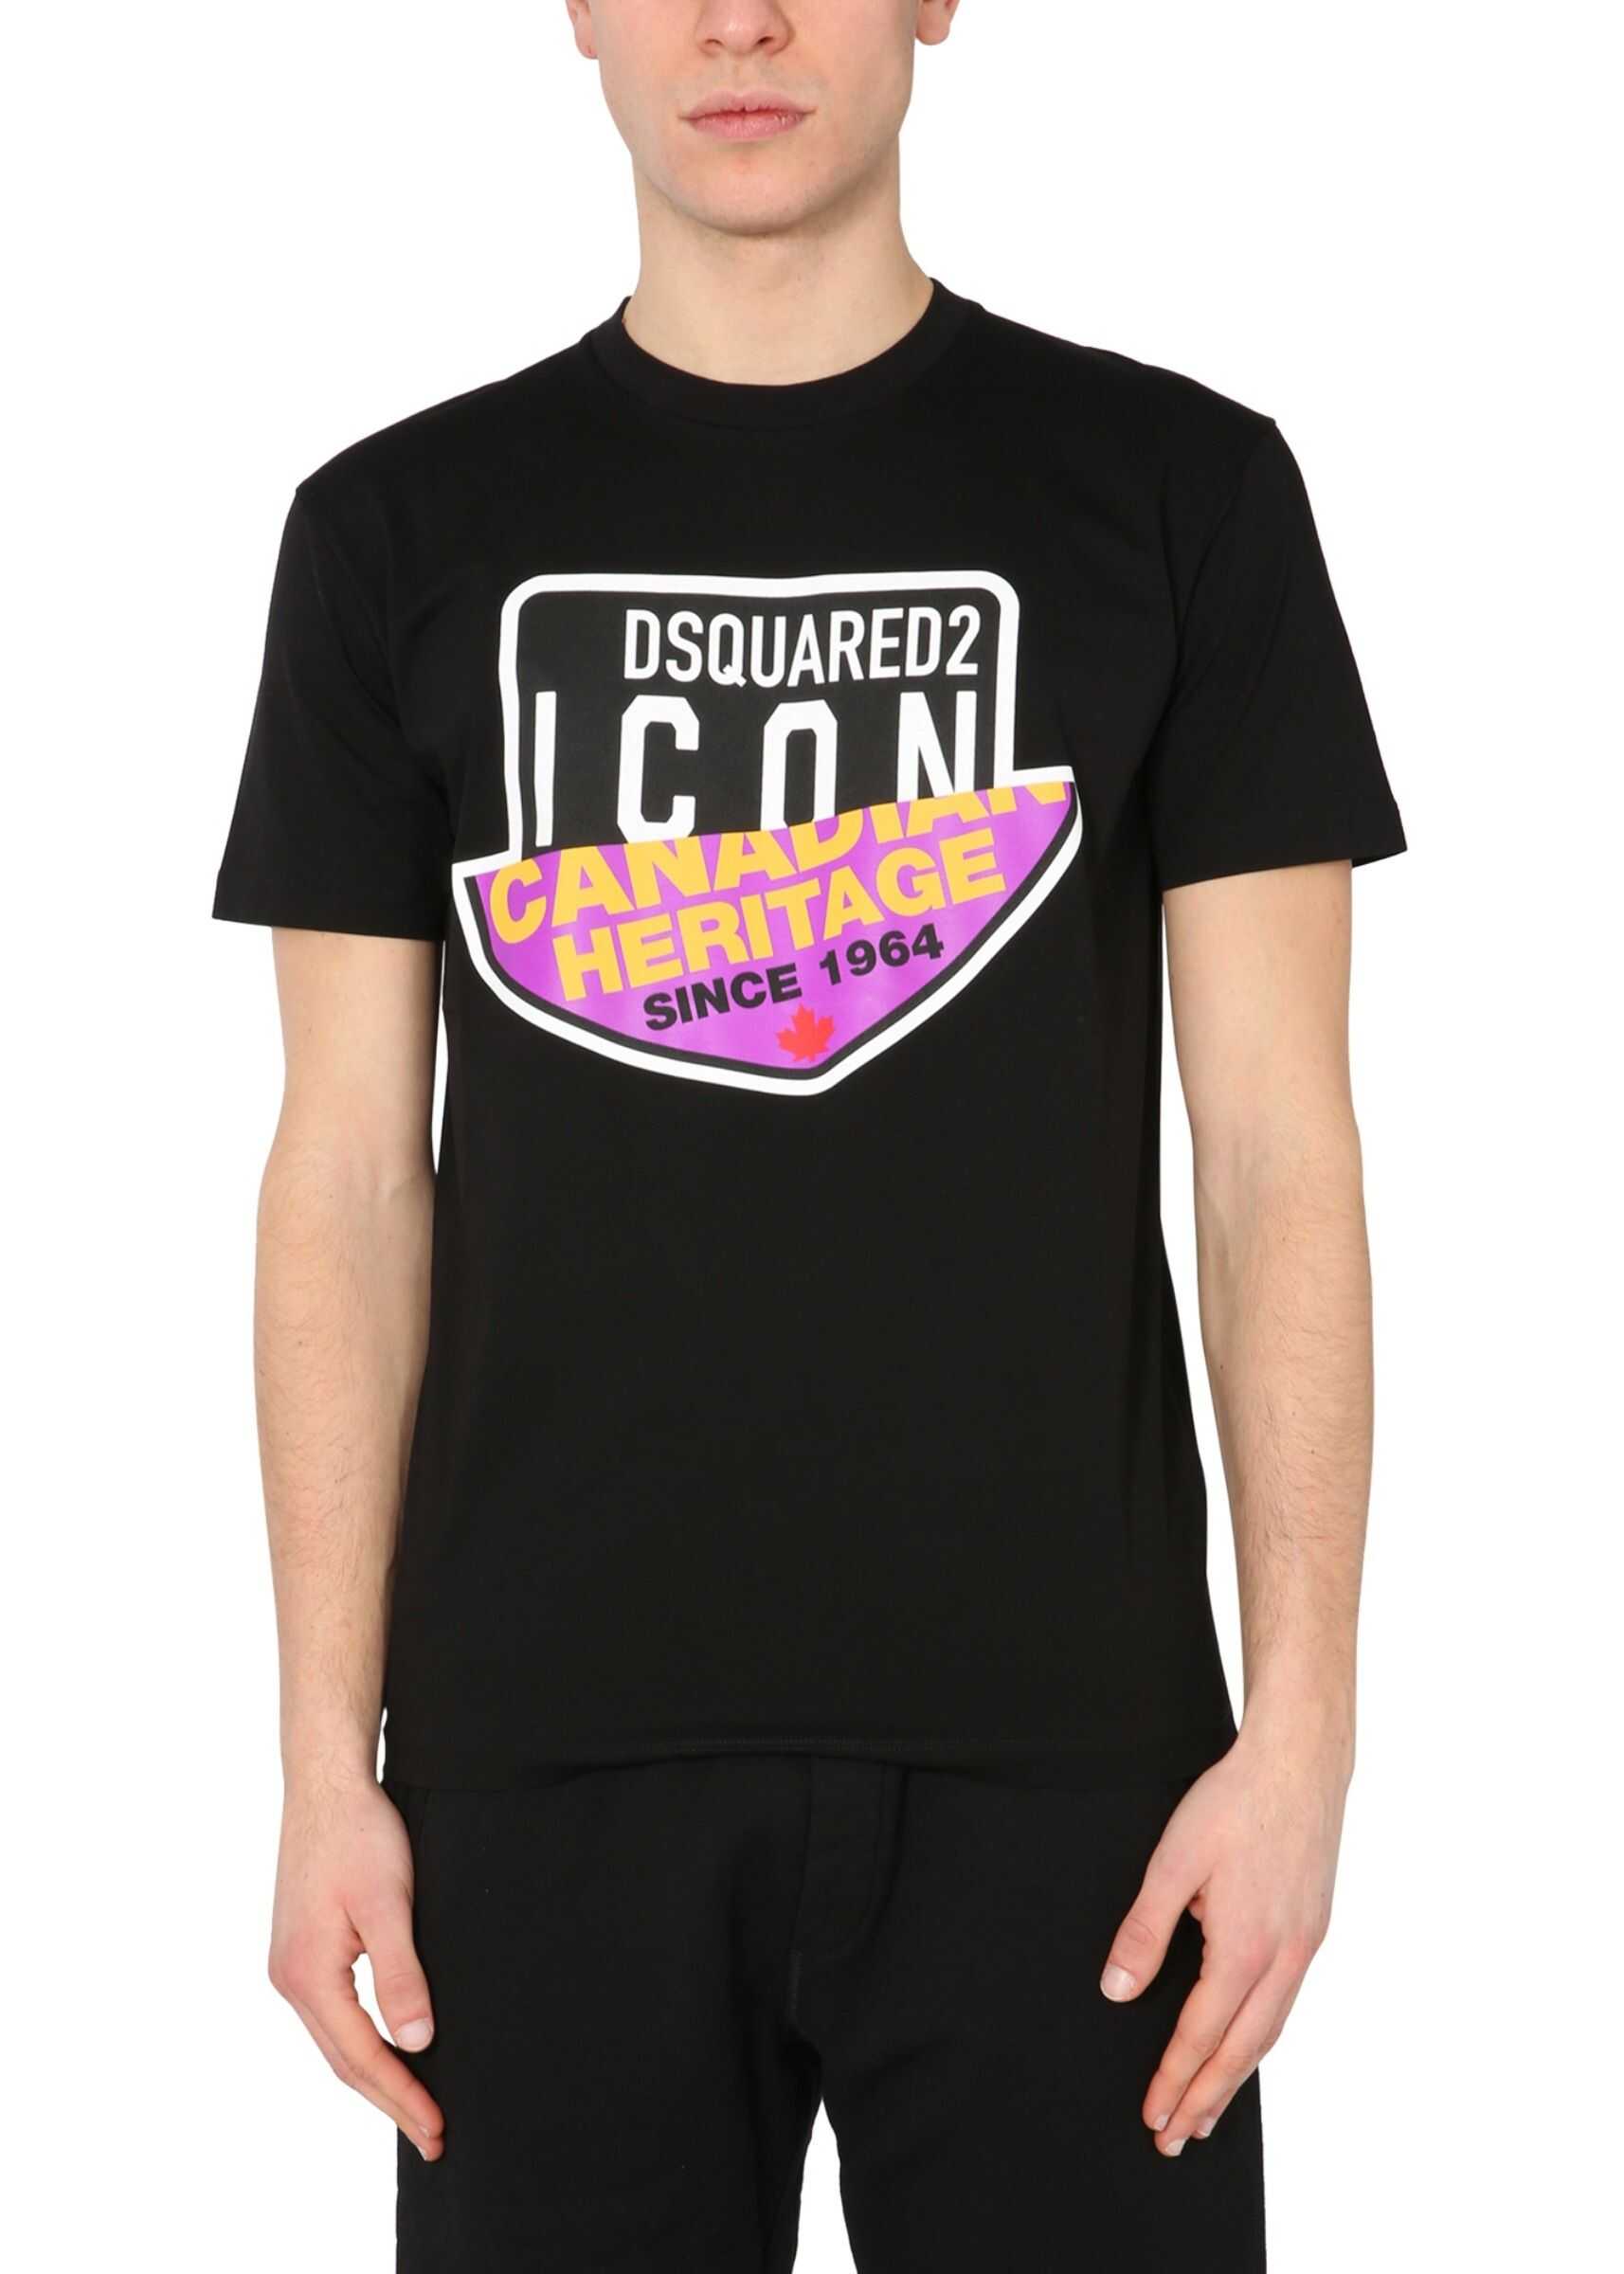 DSQUARED2 Canadian Icon T-Shirt BLACK